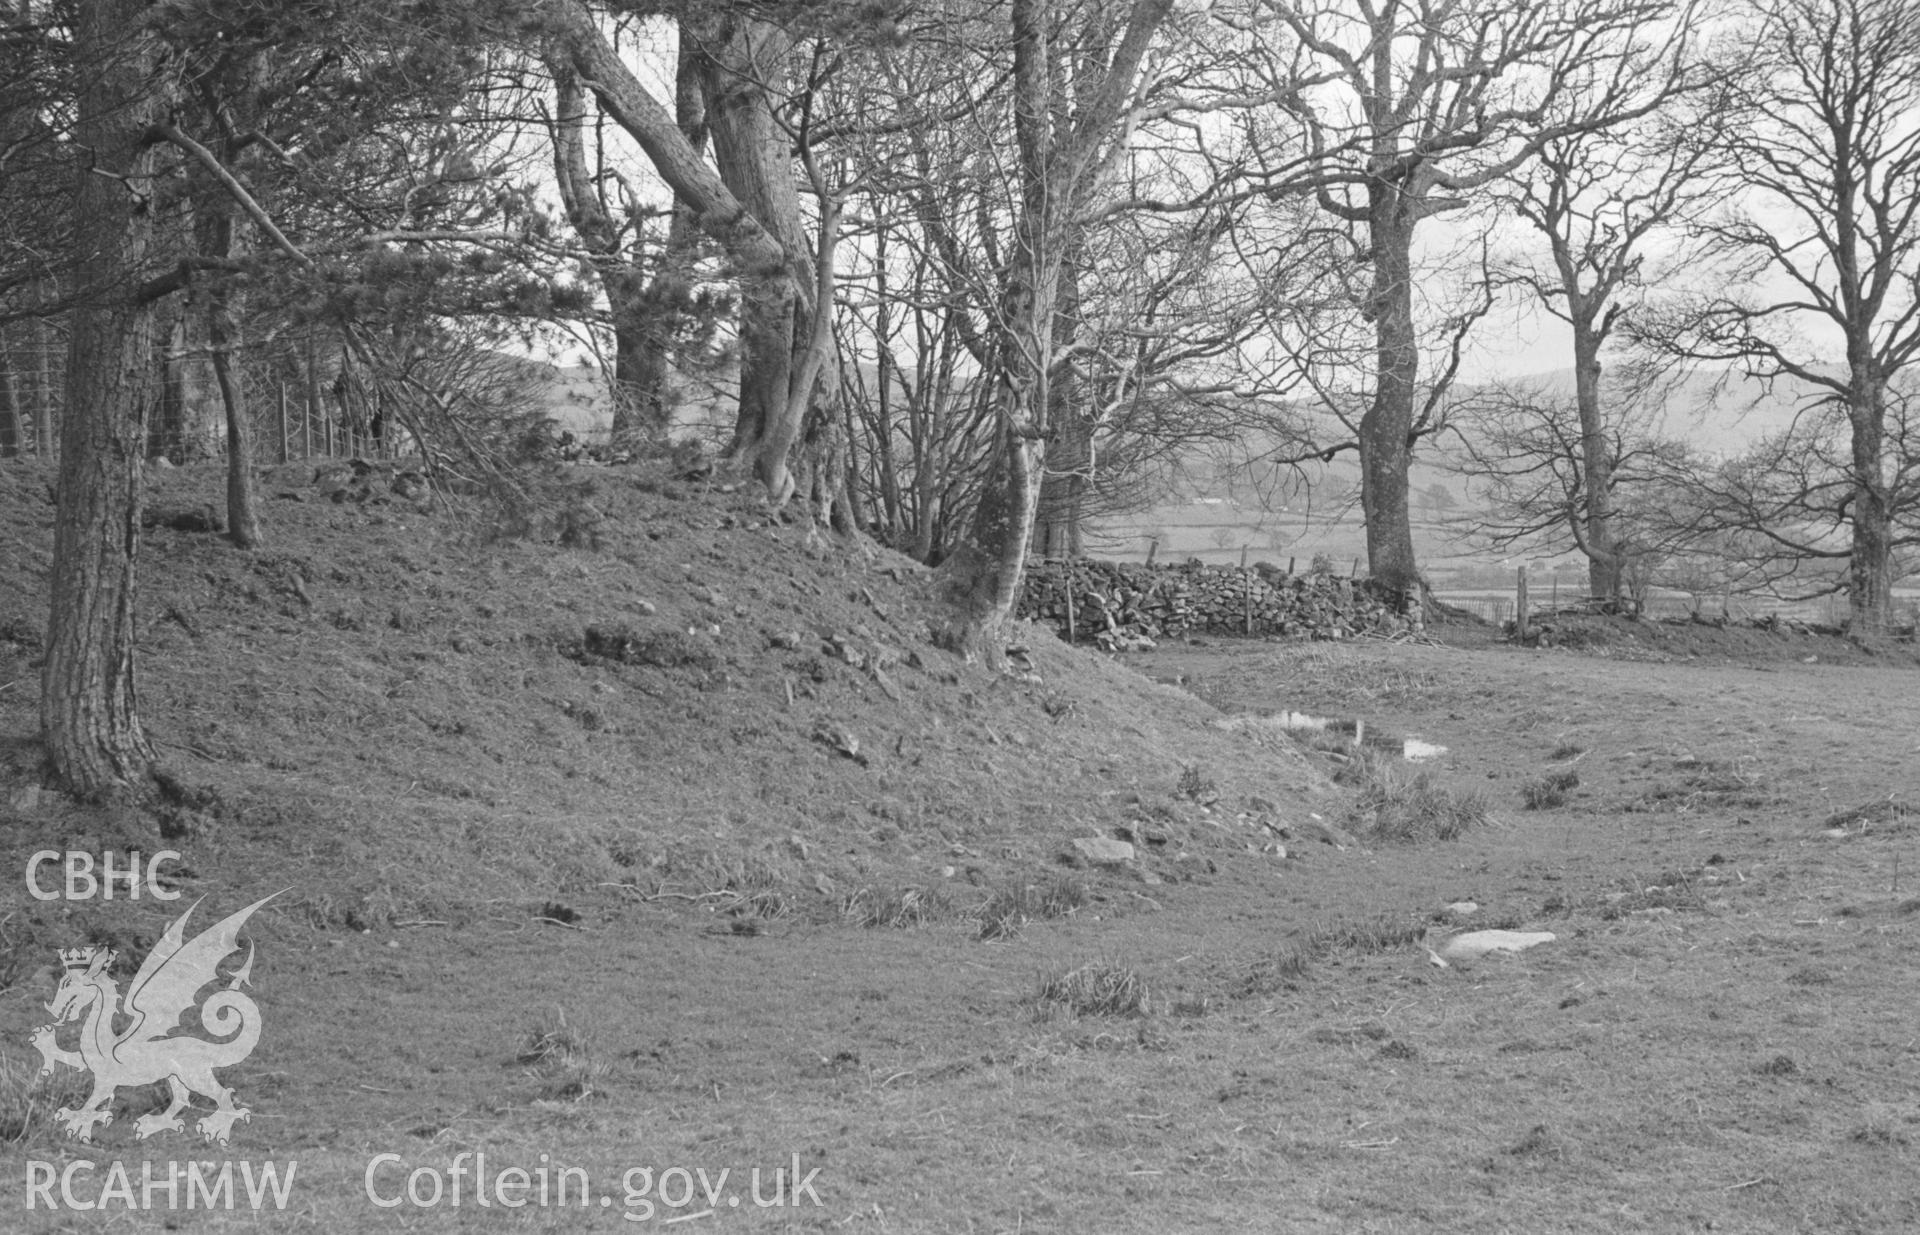 Digital copy of a black and white negative showing Caer Gai Roman fort, north of Llanuwchllyn. Photographed by Arthur O. Chater in April 1965.